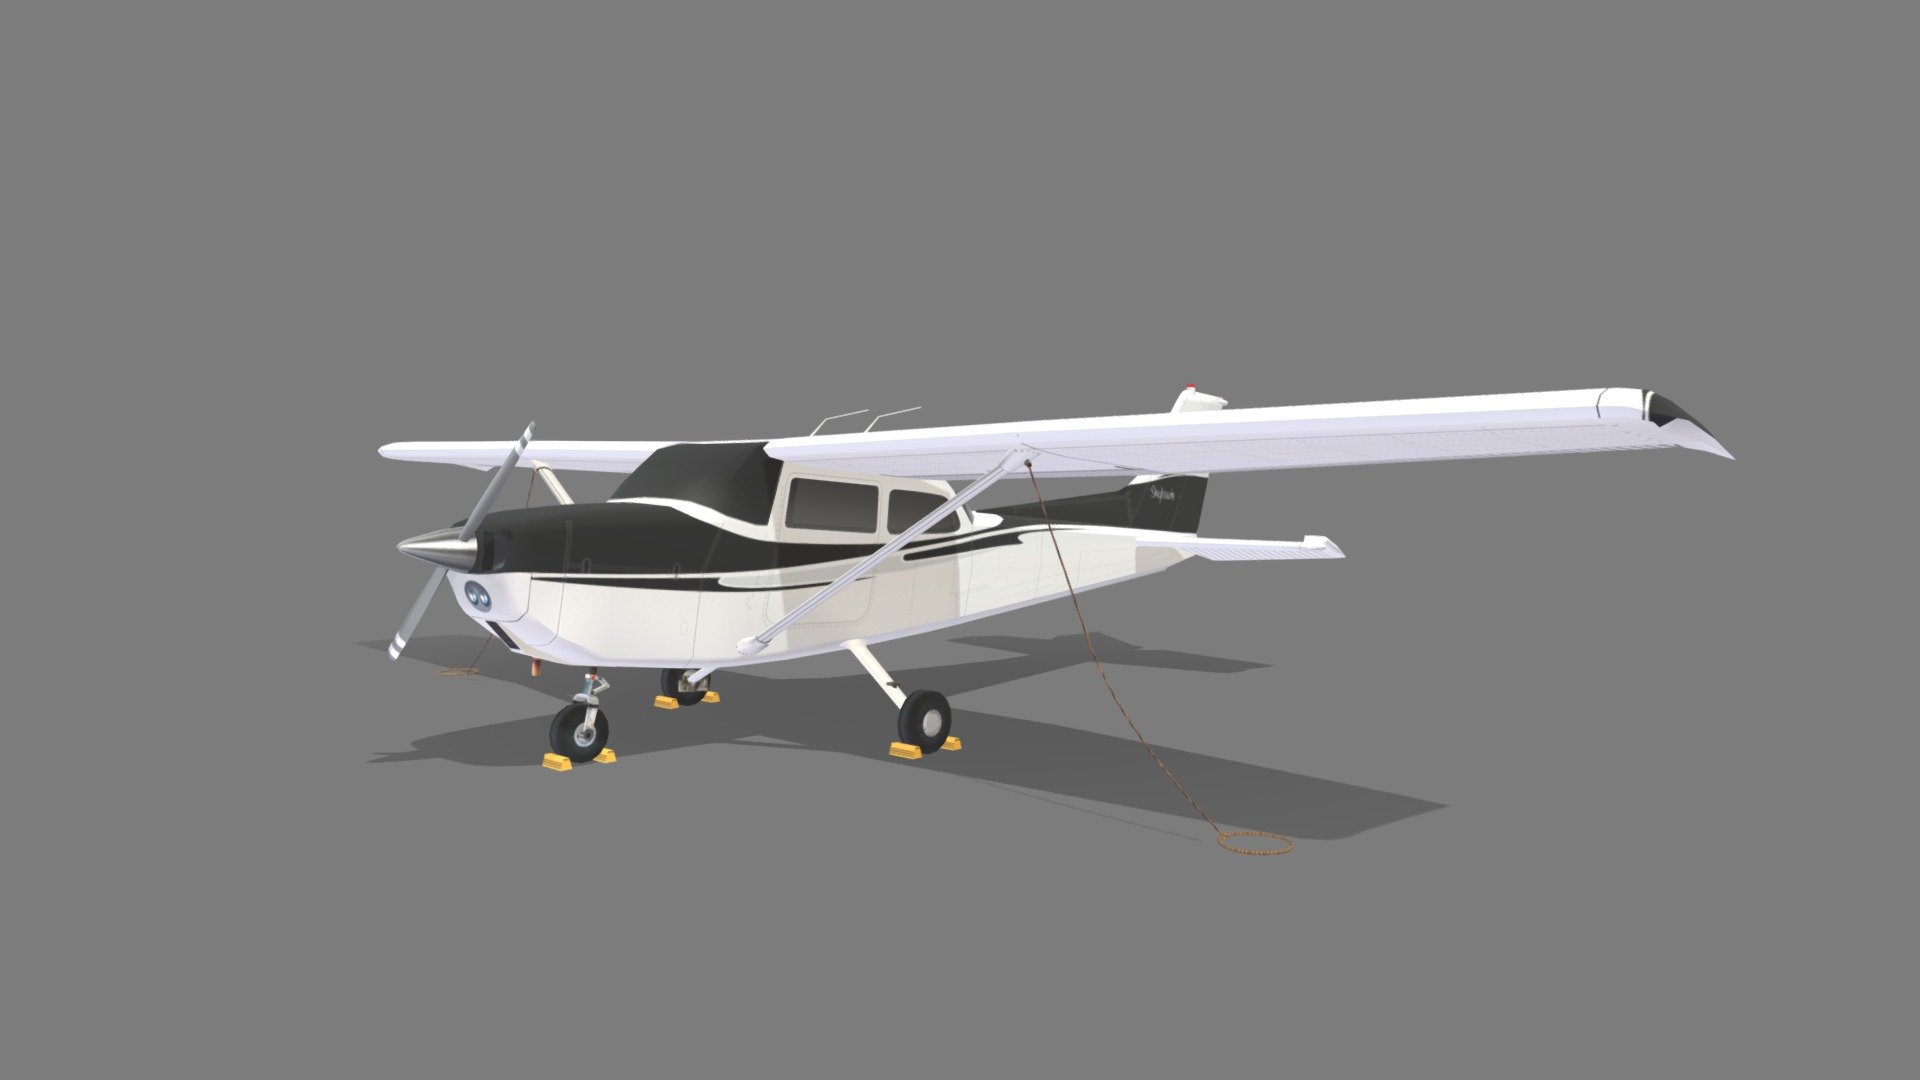 The Cessna 172 started life as a tricycle landing gear variant of the taildragger Cessna 170, with a basic level of standard equipment. In January 1955, Cessna flew an improved variant of the Cessna 170, a Continental O-300-A-powered Cessna 170C with larger elevators and a more angular tailfin.

The model comes with a blank layered texture, providing a clean slate for customization. 

this is a static, non rigged, non animated, Lowpoly mesh, 2048 psd template layered texture, for MSFS or XPlane Scenery Airport development , standard materials, enough detailed just to be seen as part of an scene without consuming GPU resources

thanks for looking! dont forget to check my other models - Cessna Skyhawk C172 Static Low Poly - Buy Royalty Free 3D model by Hangarcerouno 3d model